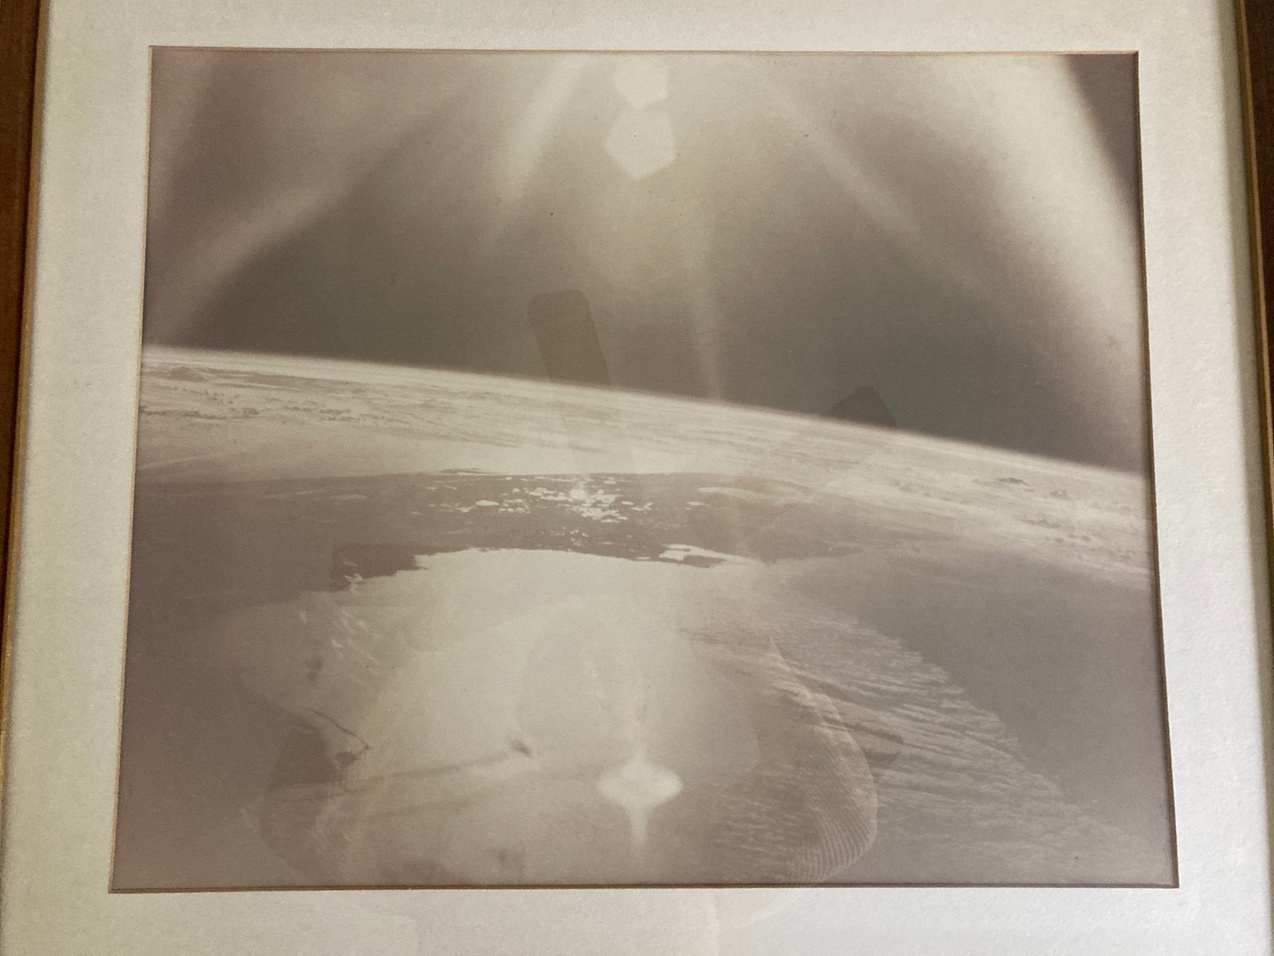 Photo of Florida (USA) taken during the Apollo 11 flight as used in the post Learning by Doing